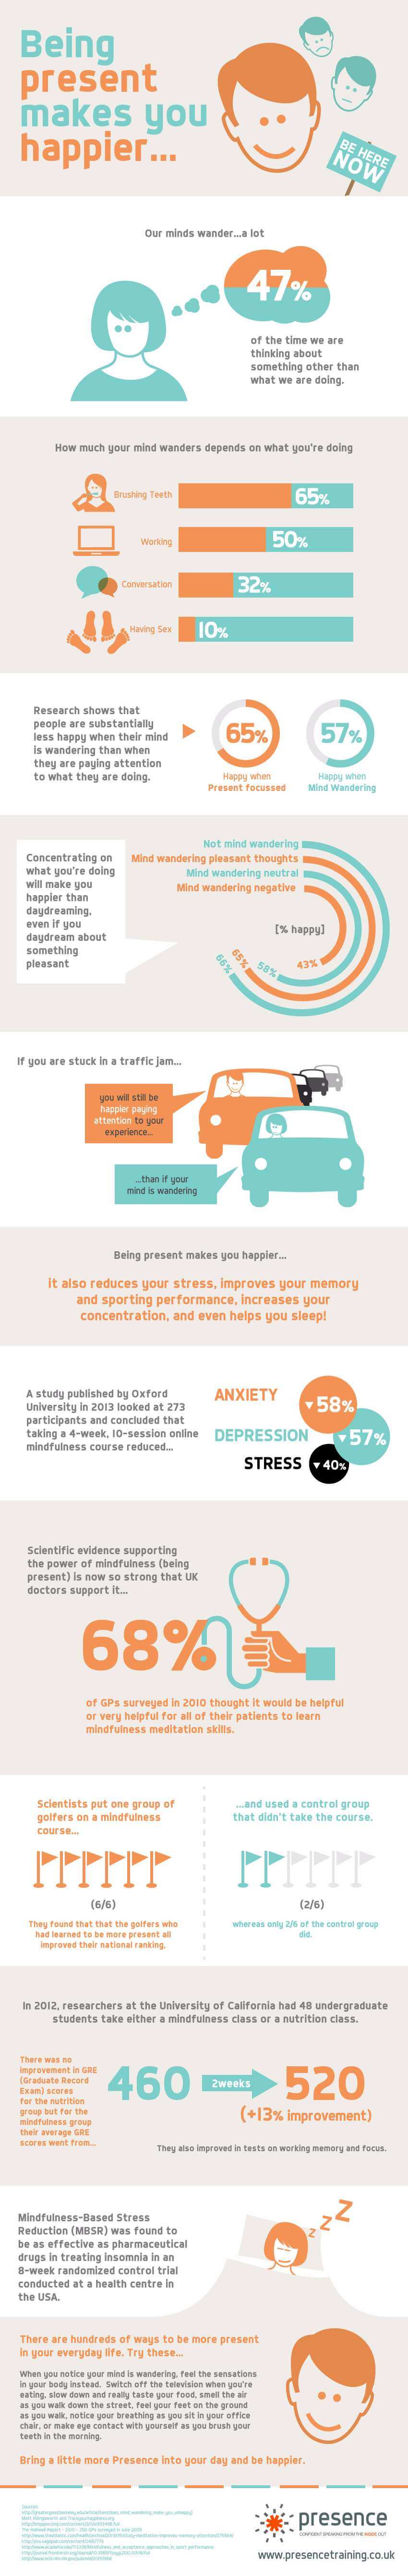 why and how being present makes you happier infographic